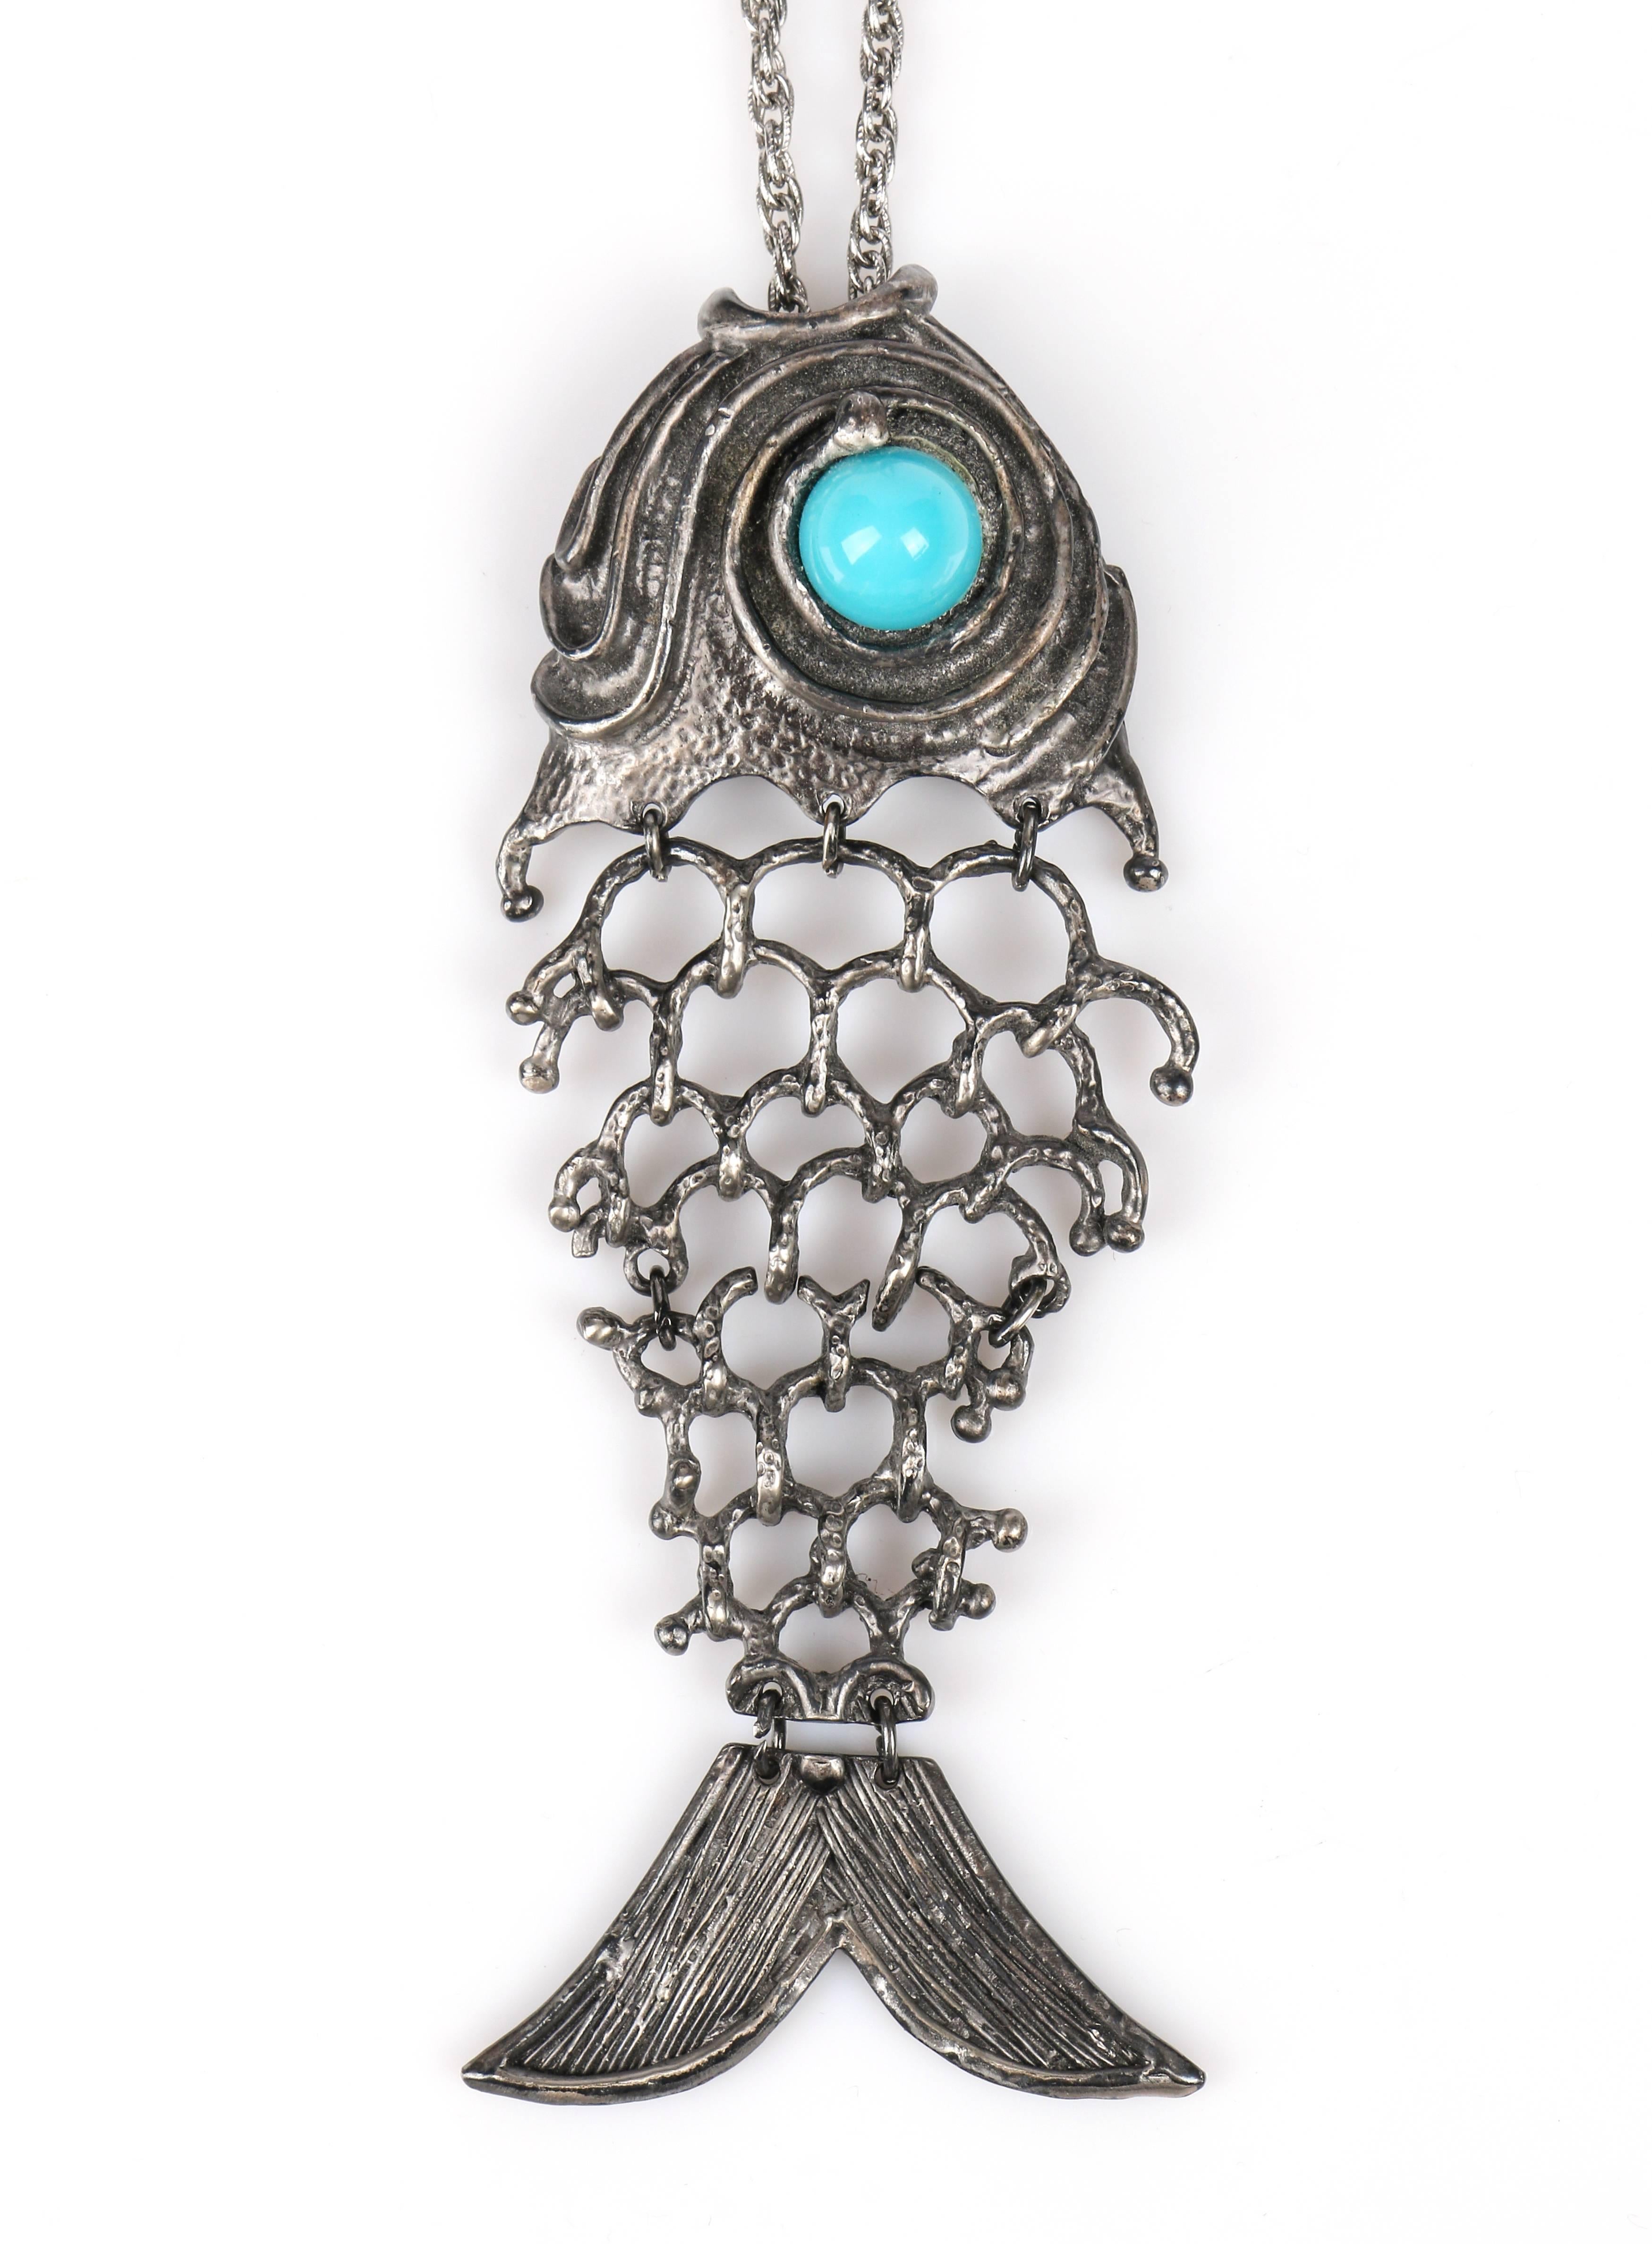 Vintage c.1970's Erwin Pearl silver tone/pewter tone statement fish pendant with turquoise stone necklace. Fish pendant has a large body section of articulated open work metal with carved tail and head detail (measuring approximately 6